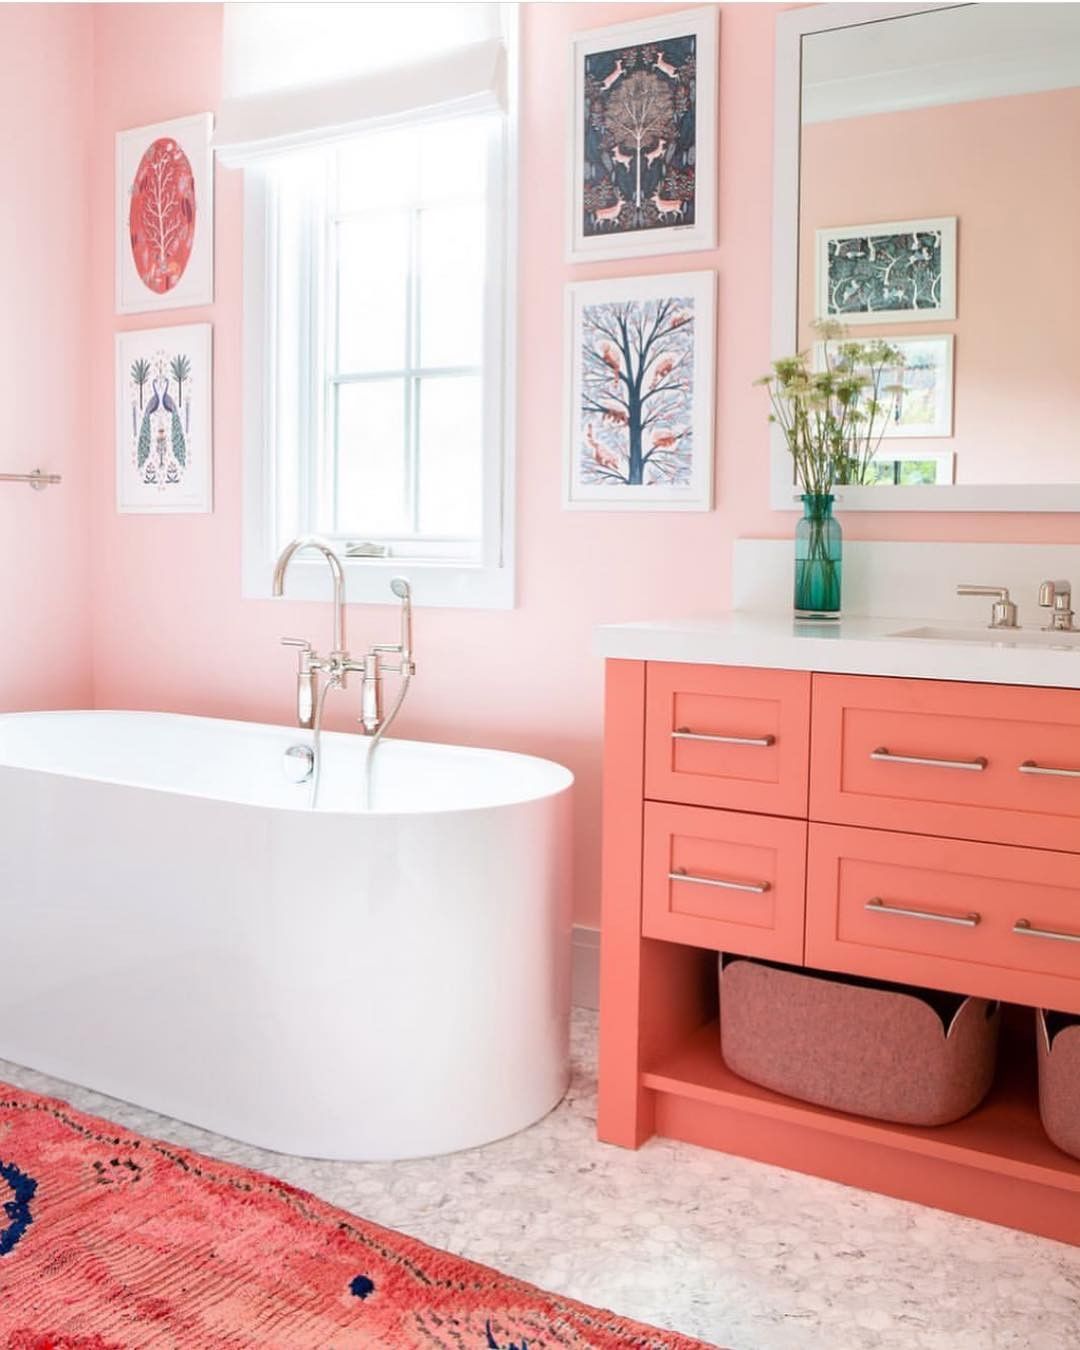 Bathroom with all pink walls and counters and bathtub. Photo by Instagram user @selliottphoto